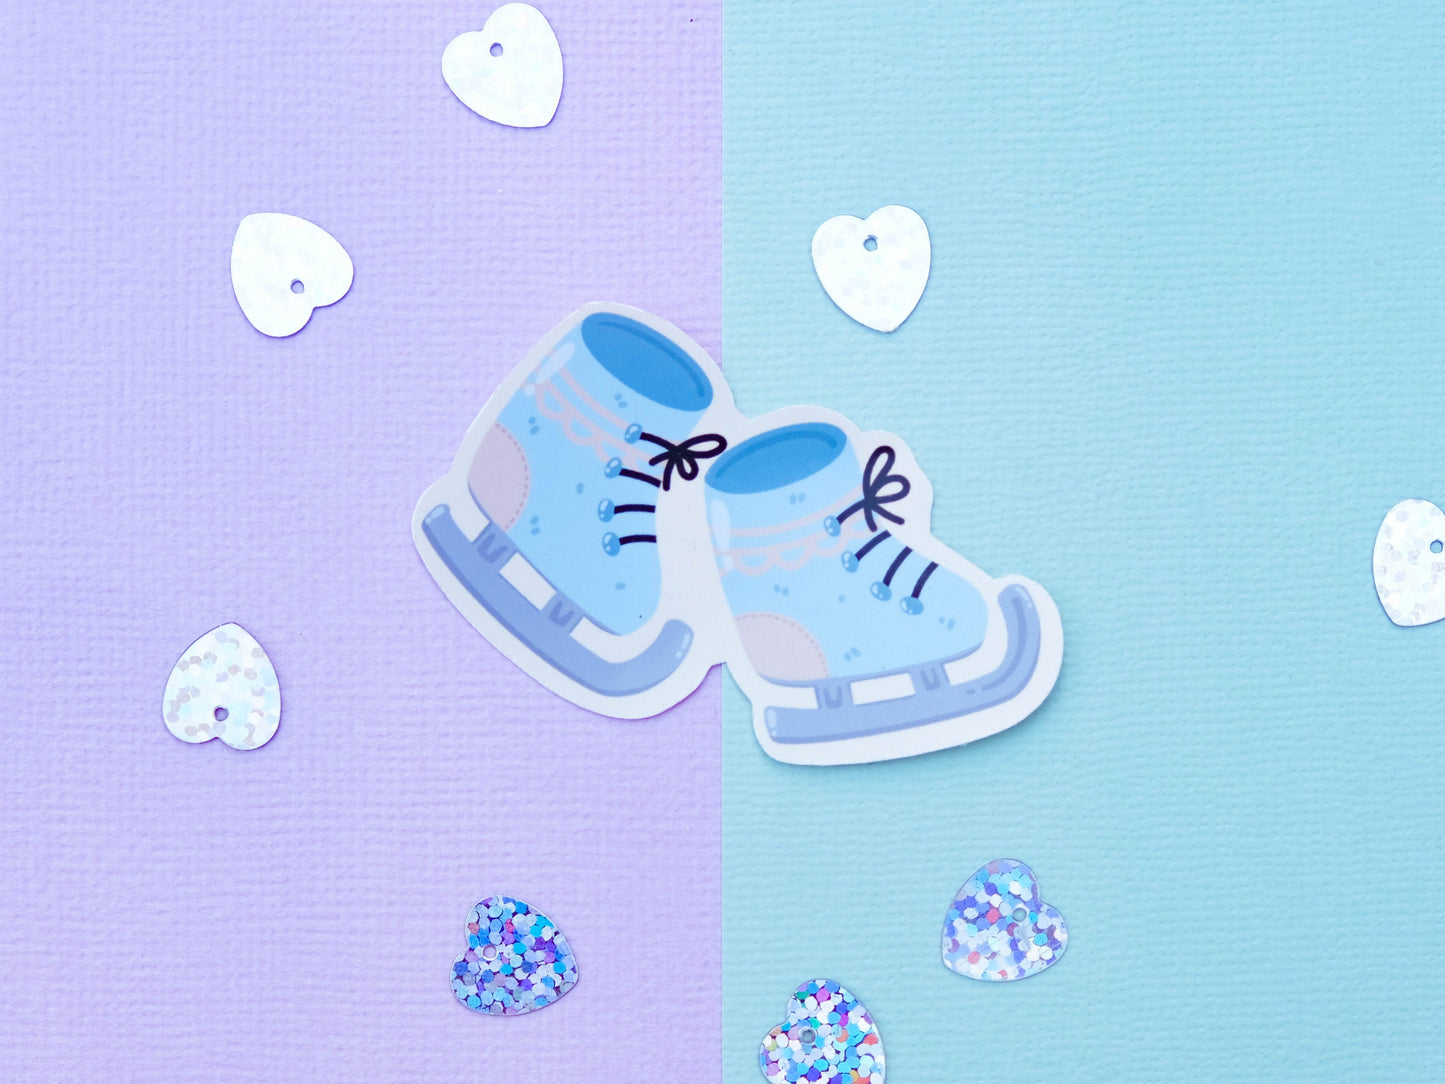 Sticker water resistant blue ice skate for Winter with cute decorations perfect to decorate every surface